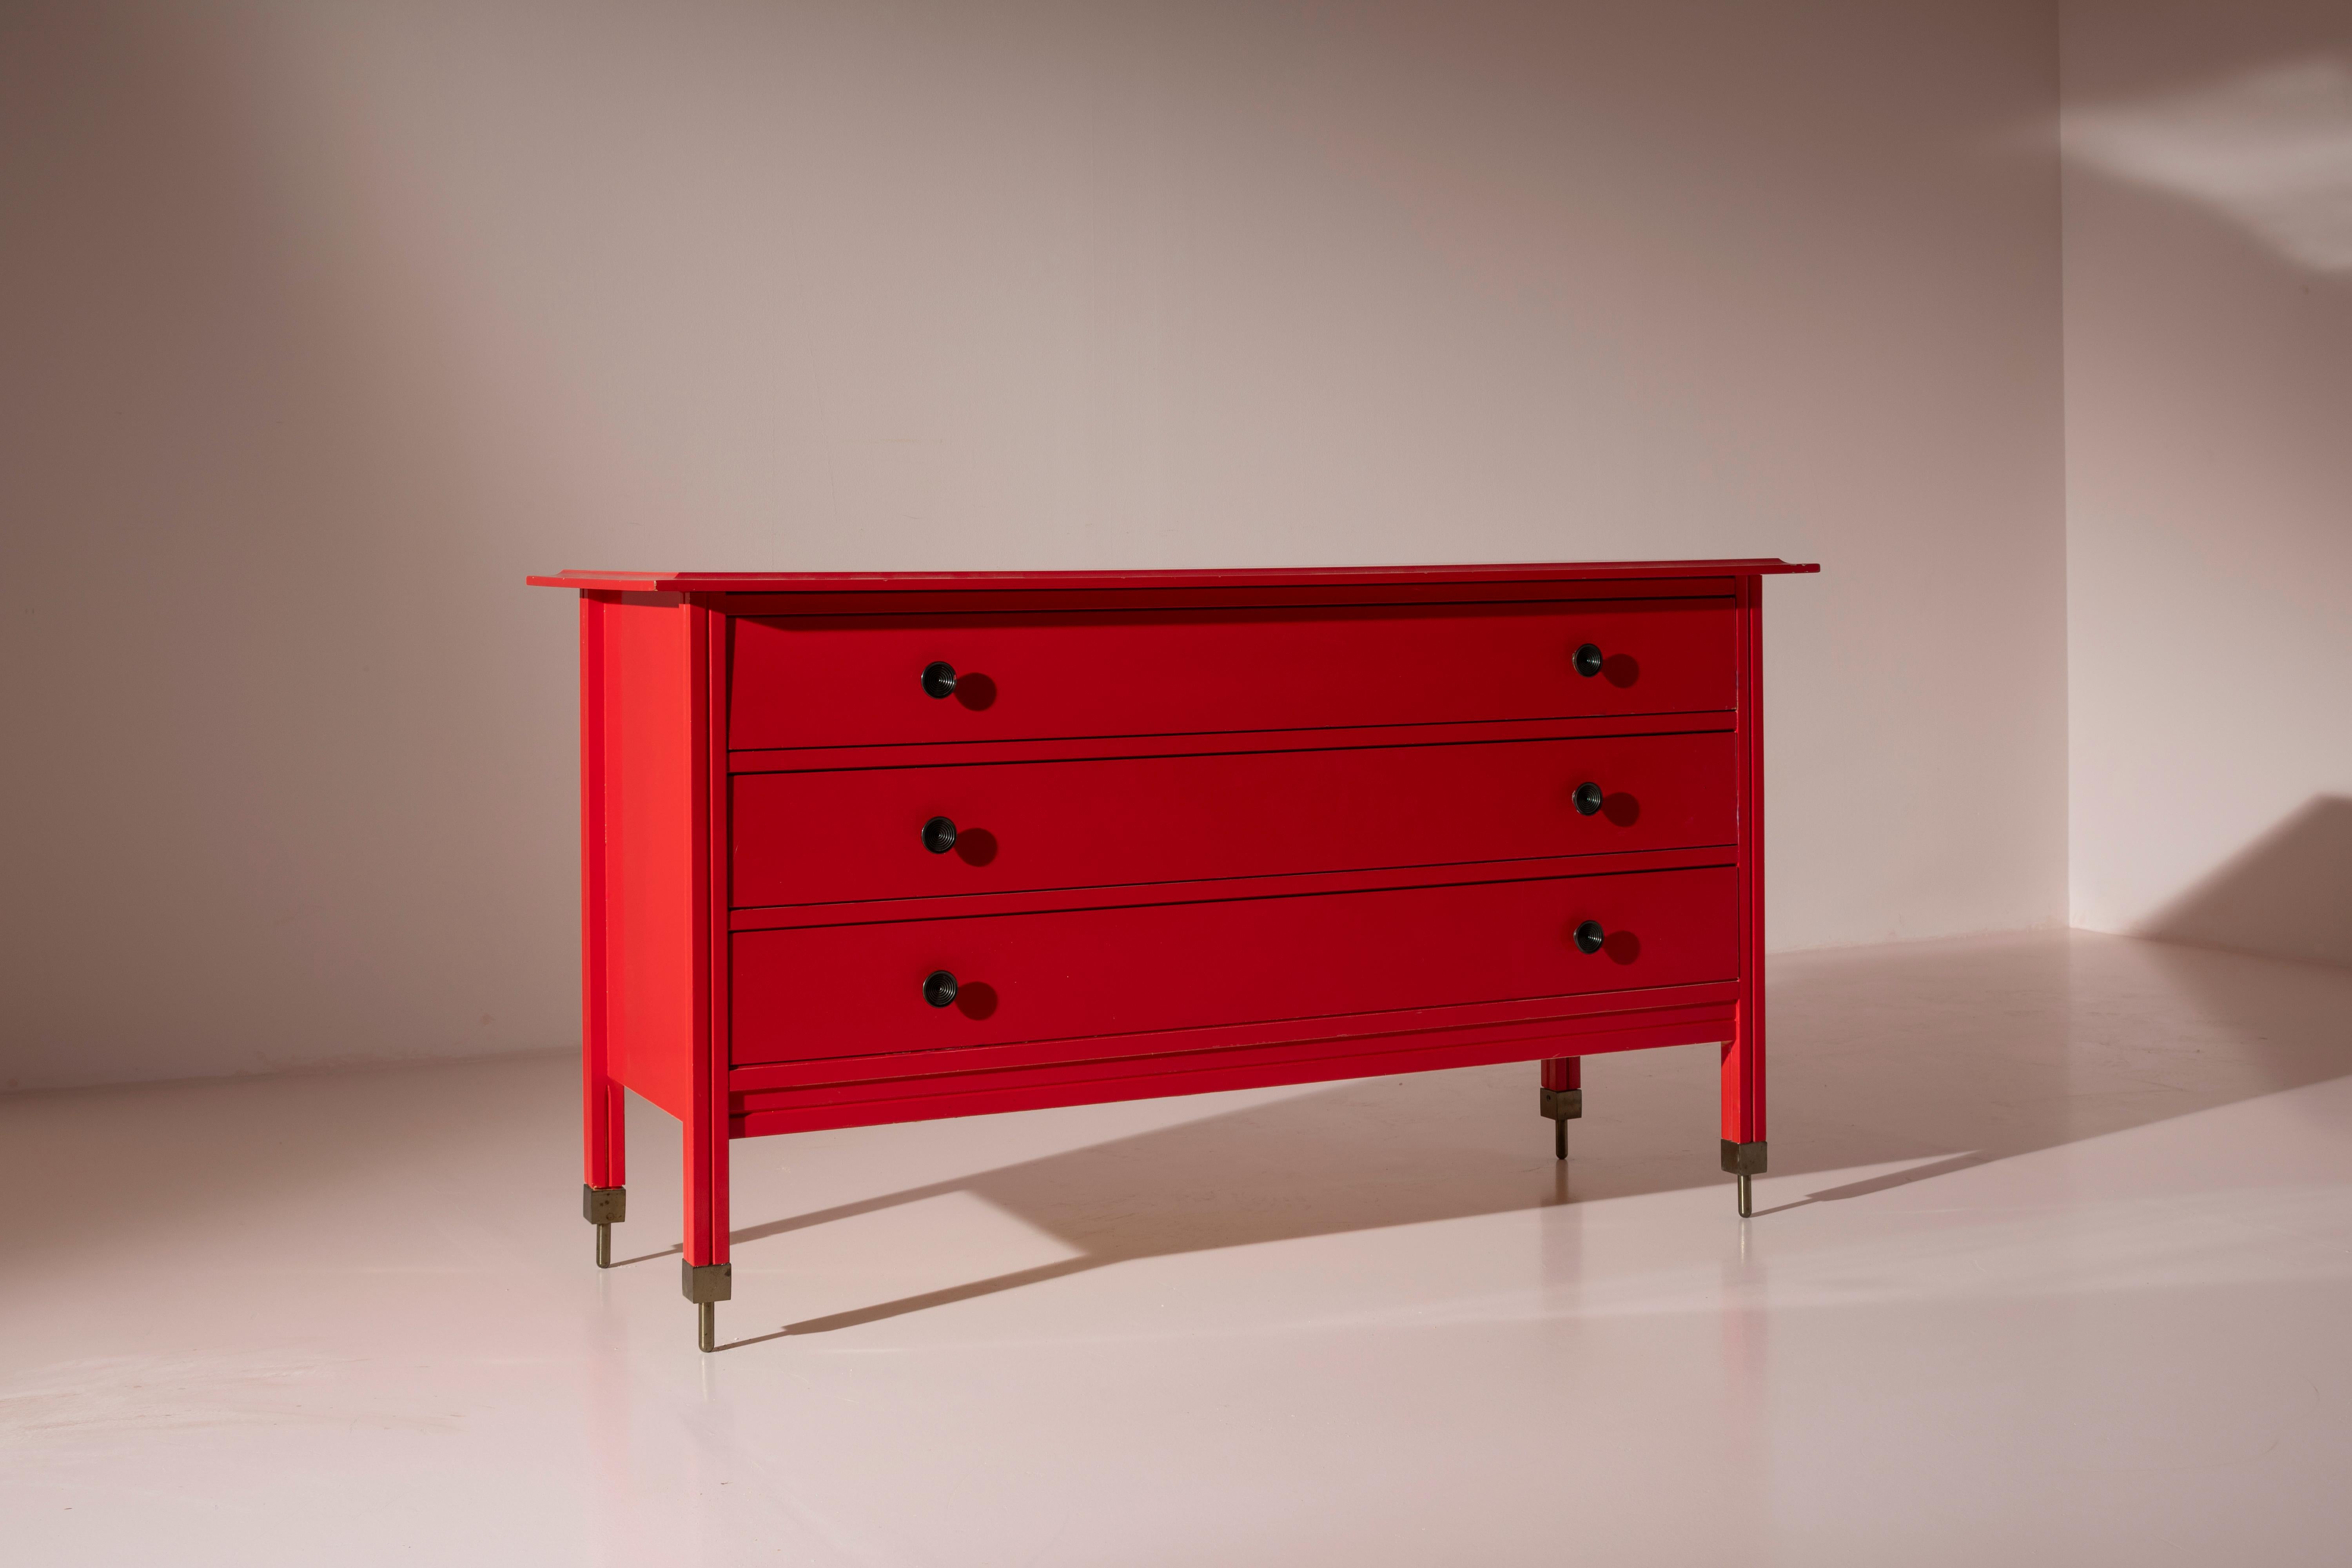 A chest of drawers, model D154, in painted wood with brass cast elements, designed by Carlo de Carli, manufactured by Sormani, Italy, 1963. The intense red color characterizes this three-drawer piece designed by Carlo de Carli.

A true symbol of